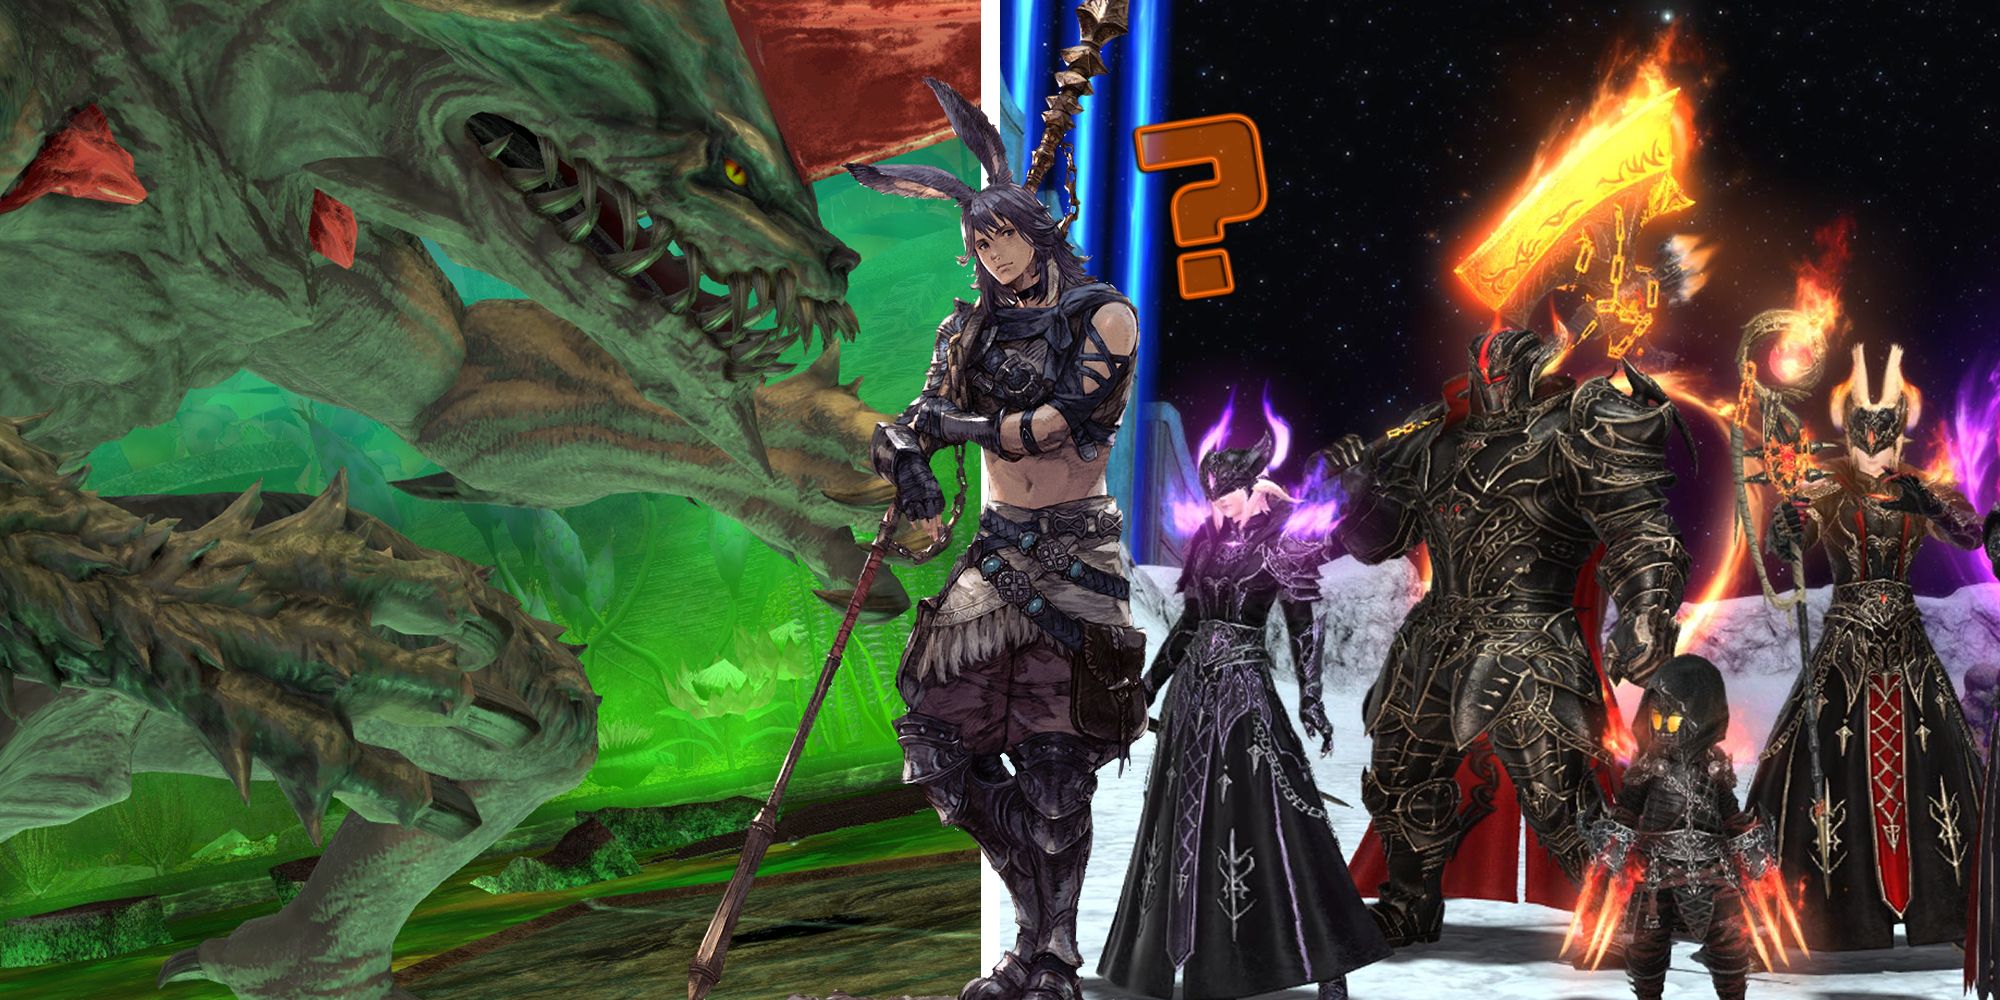 A split image featuring the Proto-Carbuncle raid from Final Fantasy 14, highly-geared raiders in a variety of glowing armour sets, and concept art of the viera male carrying a spear with a question mark next to him, as if he is a beginner raider. 